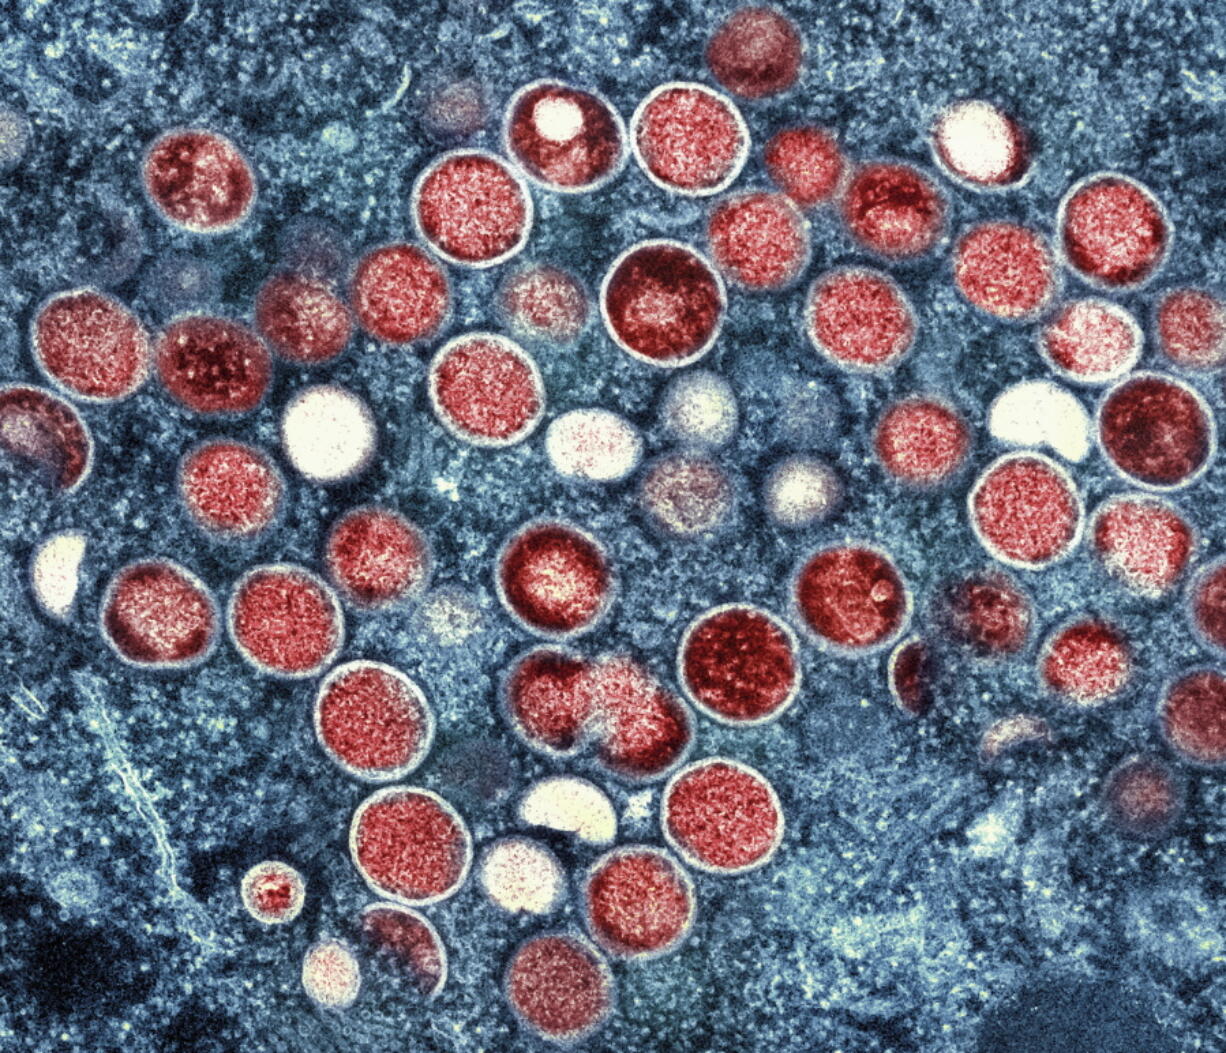 FILE - This image provided by the National Institute of Allergy and Infectious Diseases (NIAID) shows a colorized transmission electron micrograph of monkeypox particles (red) found within an infected cell (blue), cultured in the laboratory that was captured and color-enhanced at the NIAID Integrated Research Facility (IRF) in Fort Detrick, Md. On Friday, Aug. 12, 2022, The Associated Press reported on stories circulating online incorrectly claiming that monkeypox hasn't been detected in Georgia drinking water. The July 26 Atlanta-area news broadcast broadcast is being mischaracterized online to push the false claim that monkeypox has been found in residents' tap water.